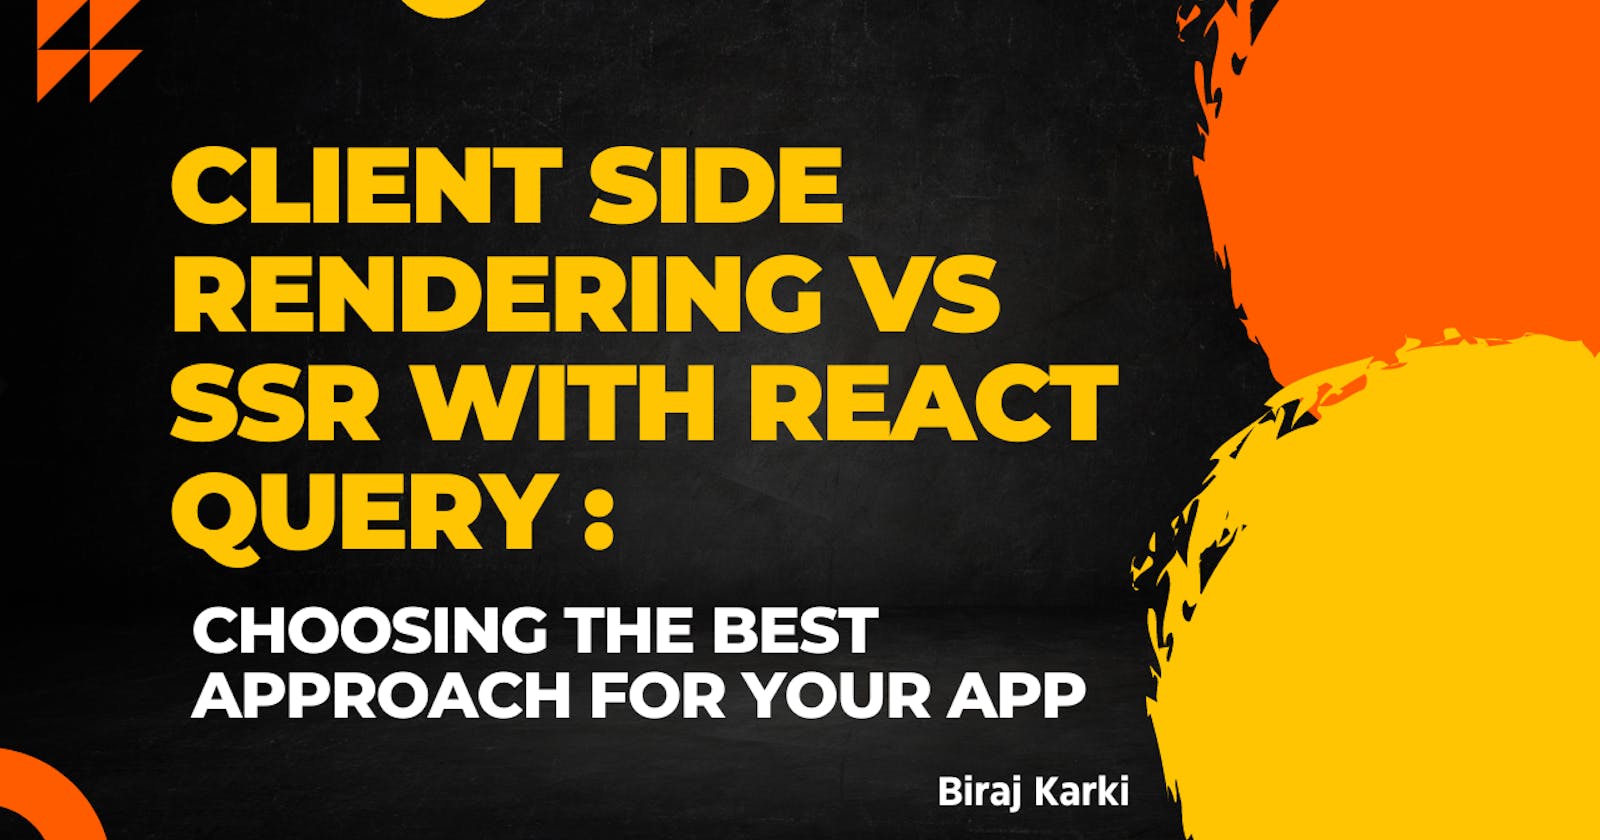 Client Side Rendering vs SSR with React Query: Choosing the Best Approach for Your App